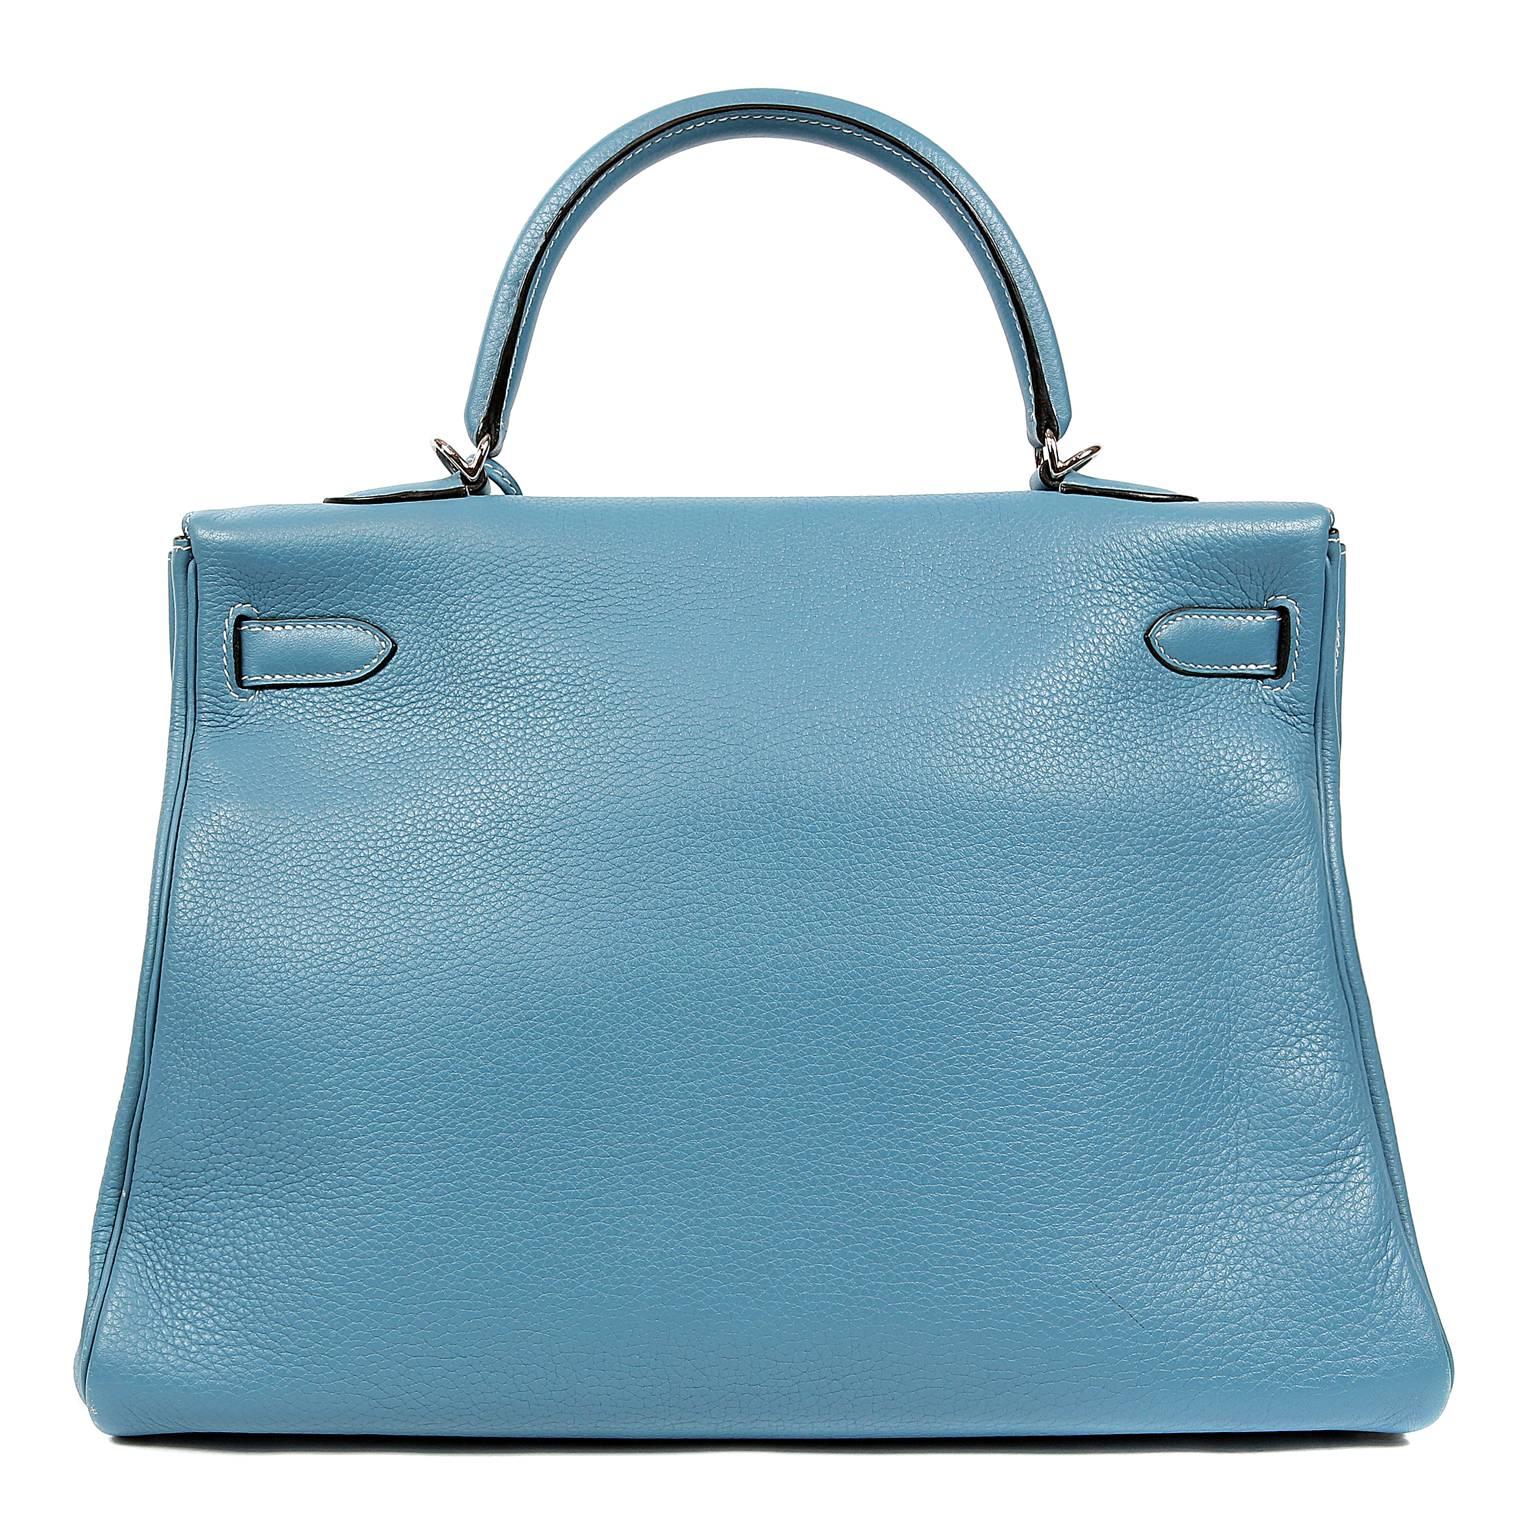 Hermès Blue Jean Clemence 35 cm Kelly Retourne- EXCELLENT PLUS Condition
  Hand stitched by skilled craftsmen, wait lists of a year or more are common for Hermès bags. Blue Jean paired with palladium is a beautiful combination in the Retourne Kelly.